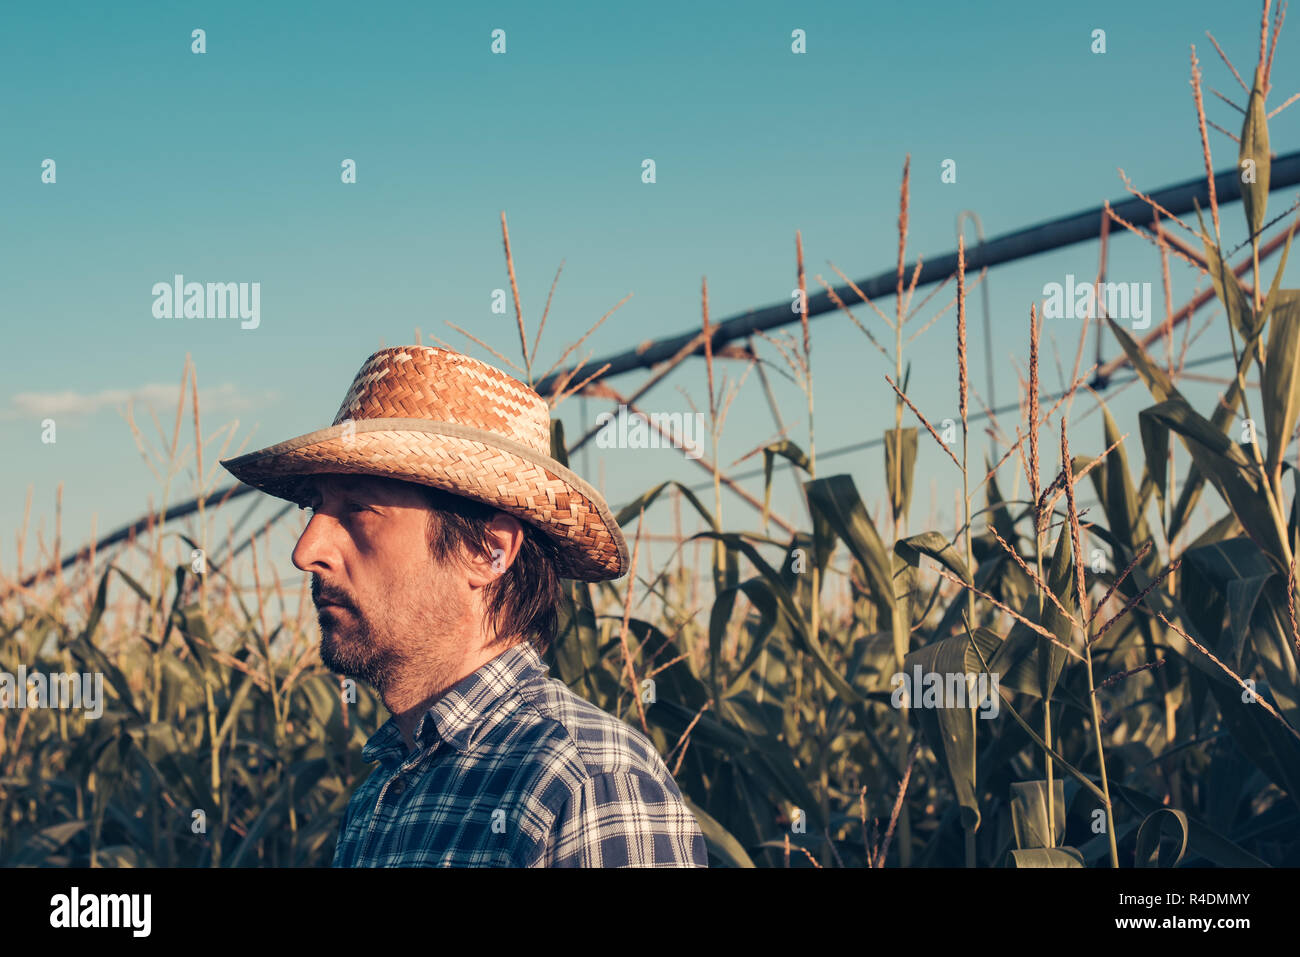 Serious confident farmer planning agricutural activity in corn field, looking self-assured and determined Stock Photo